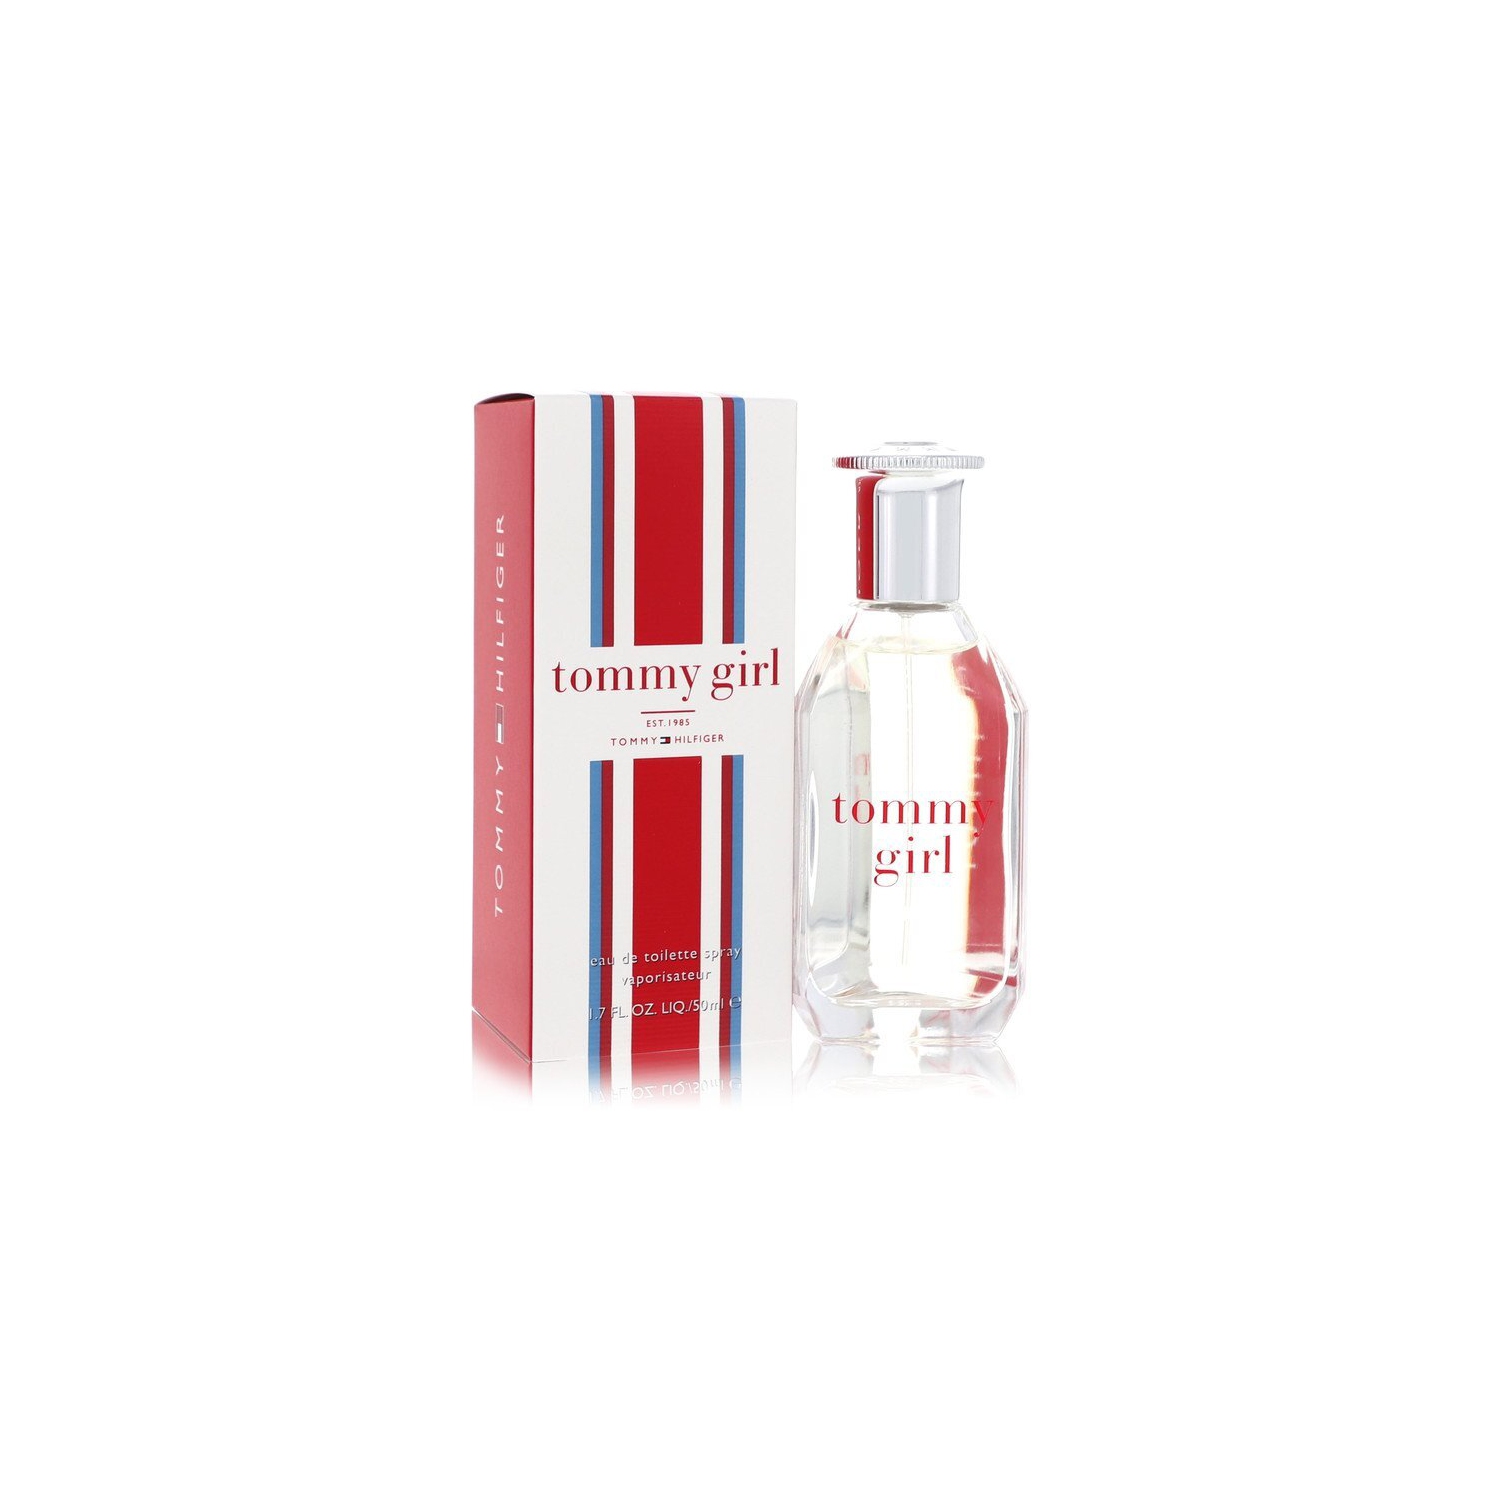 New Item TOMMY HILFIGER TOMMY GIRL COLOGNE SPRAY 1.7 OZ TOMMY GIRL/TOMMY  HILFIGER COLOGNE SPRAY 1.7 OZ (W) NEW PACKAGING 